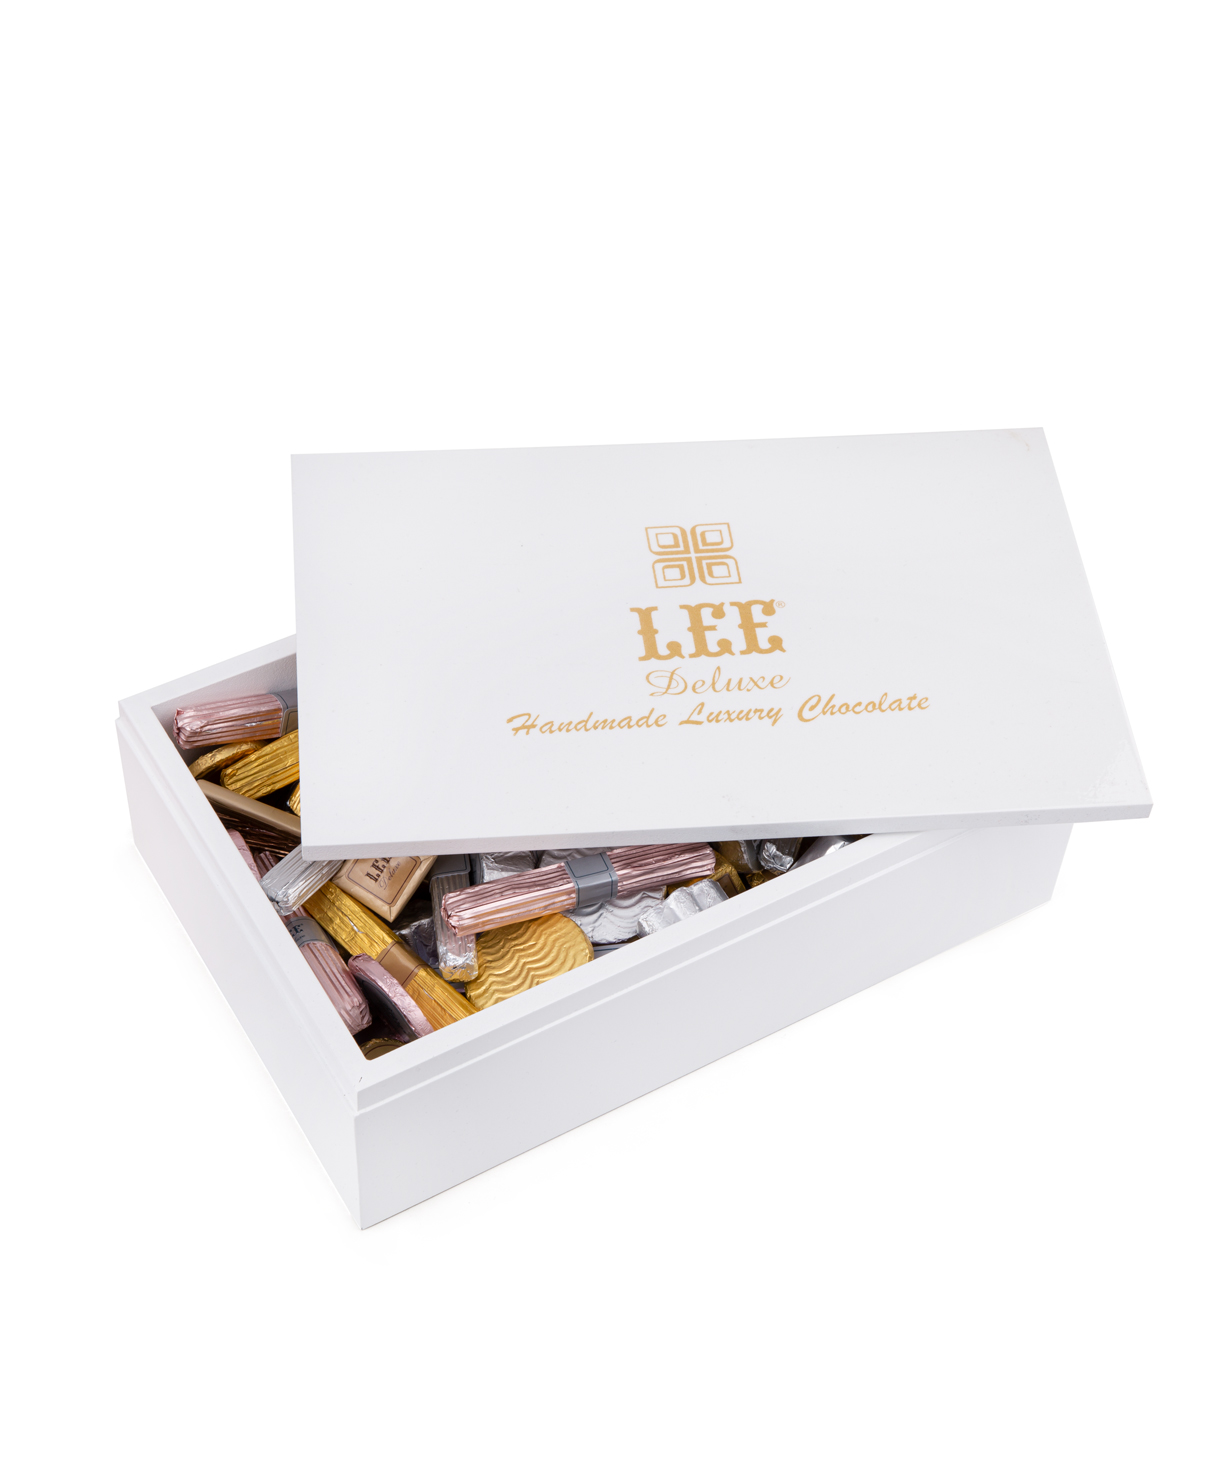 Collection `Lee Deluxe` in a wooden box, white